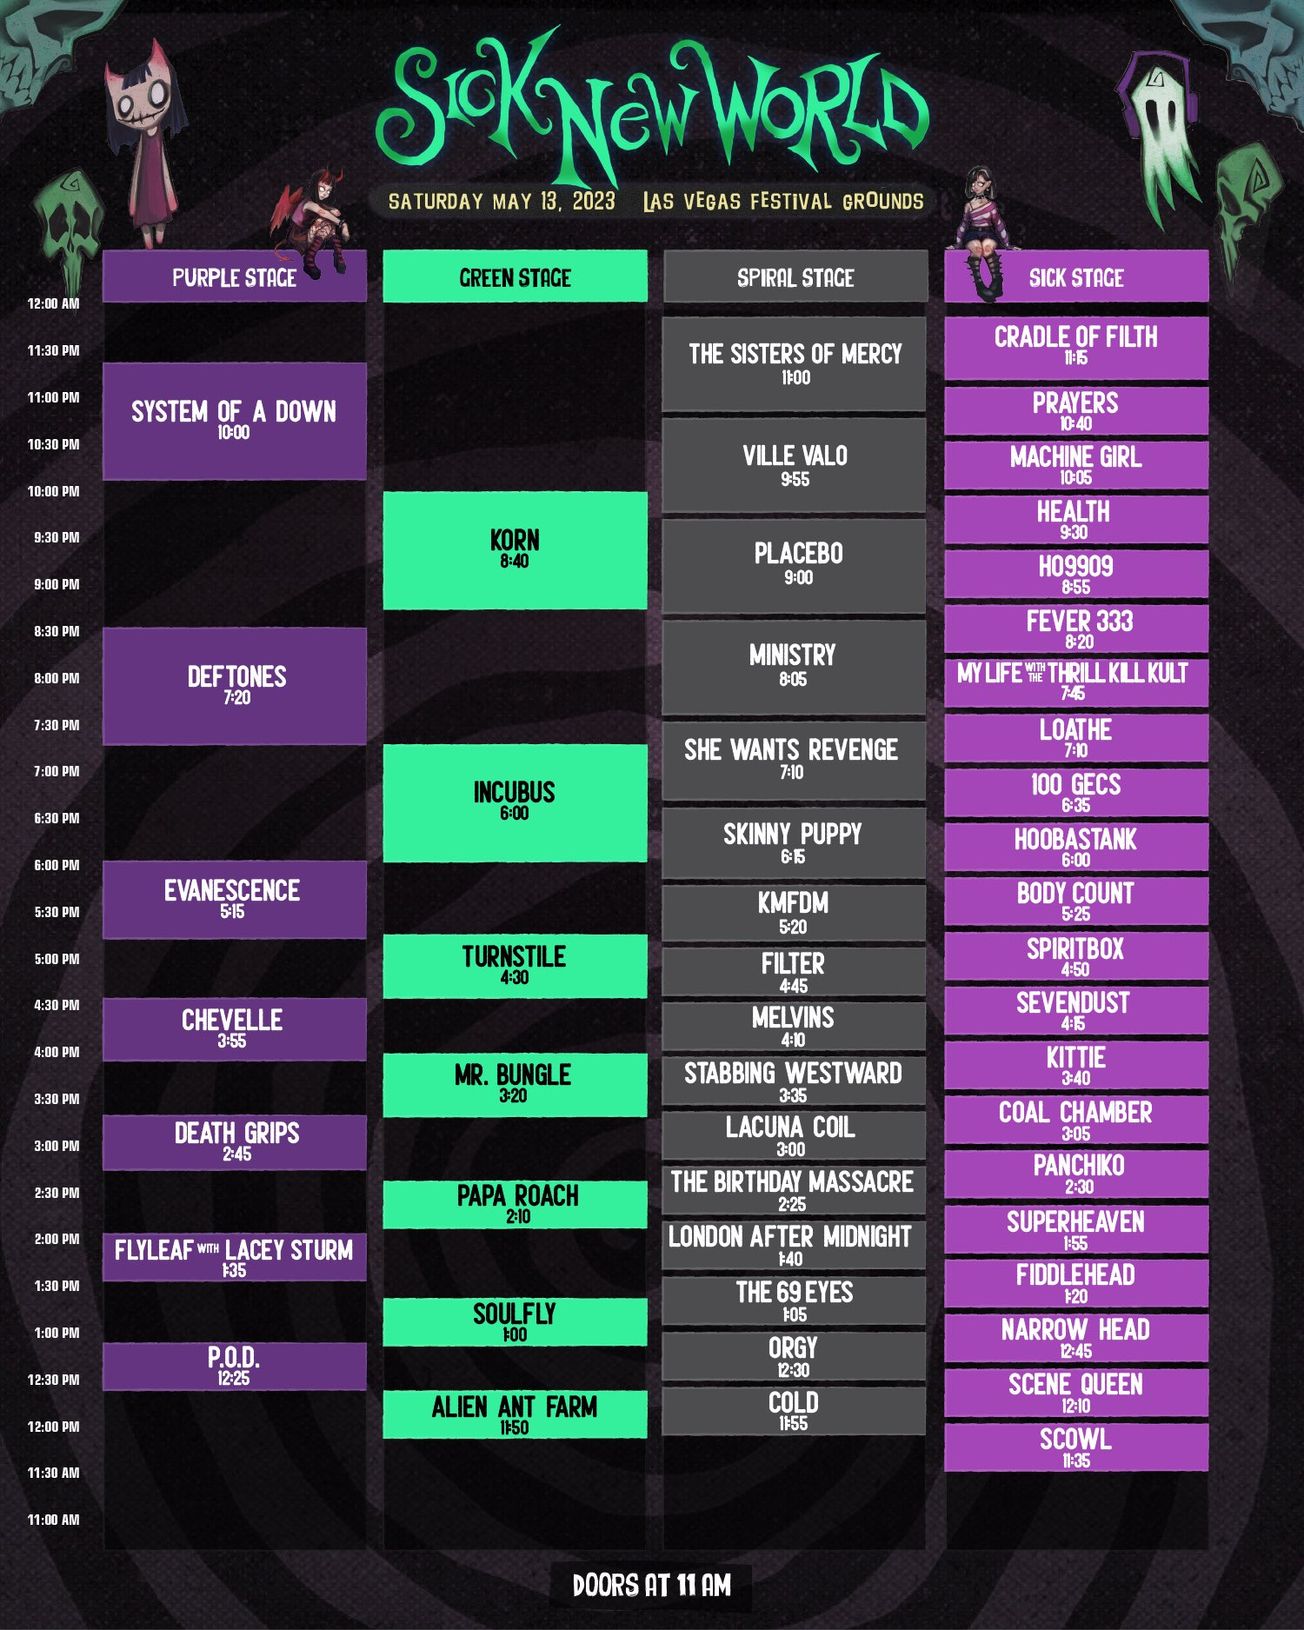 Sick New World Set Times Released